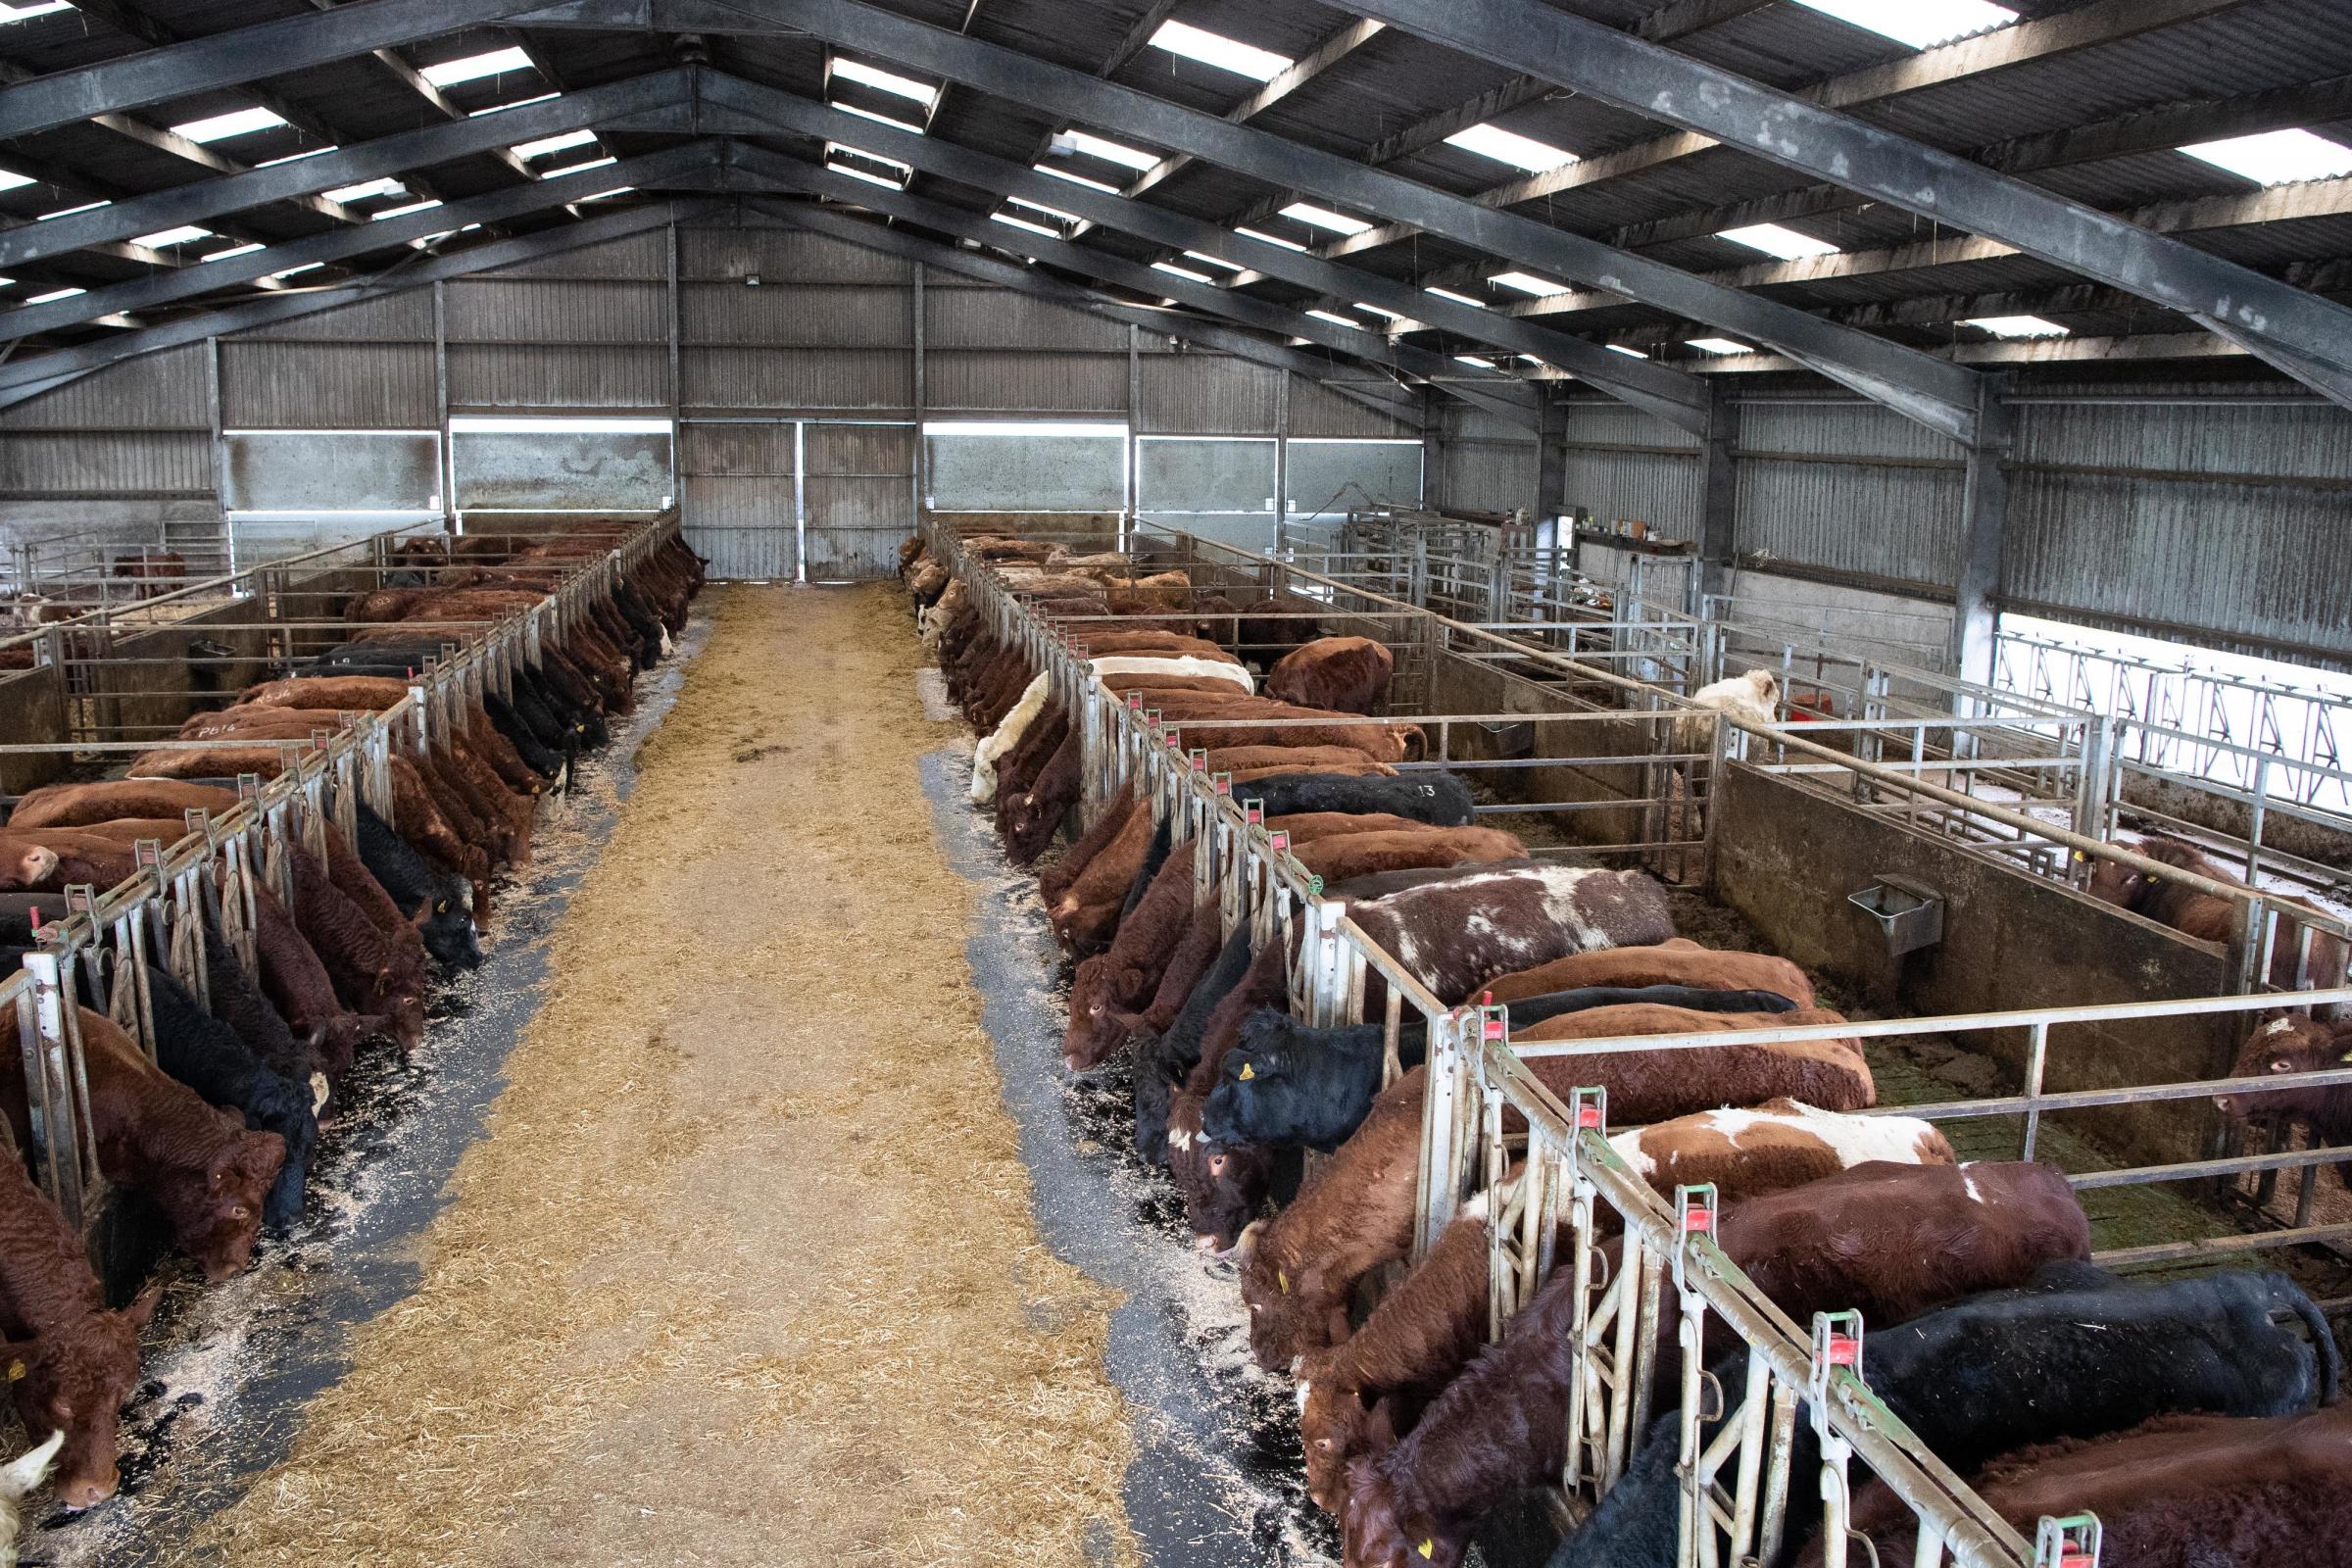 the herd is housed from October through to the middle of May, depending on the weather and with ease of management, fleshing ability, milkiness and good temperament mean they are the ideal type of cattle to work with Ref:RH280121223 Rob Haining / The S